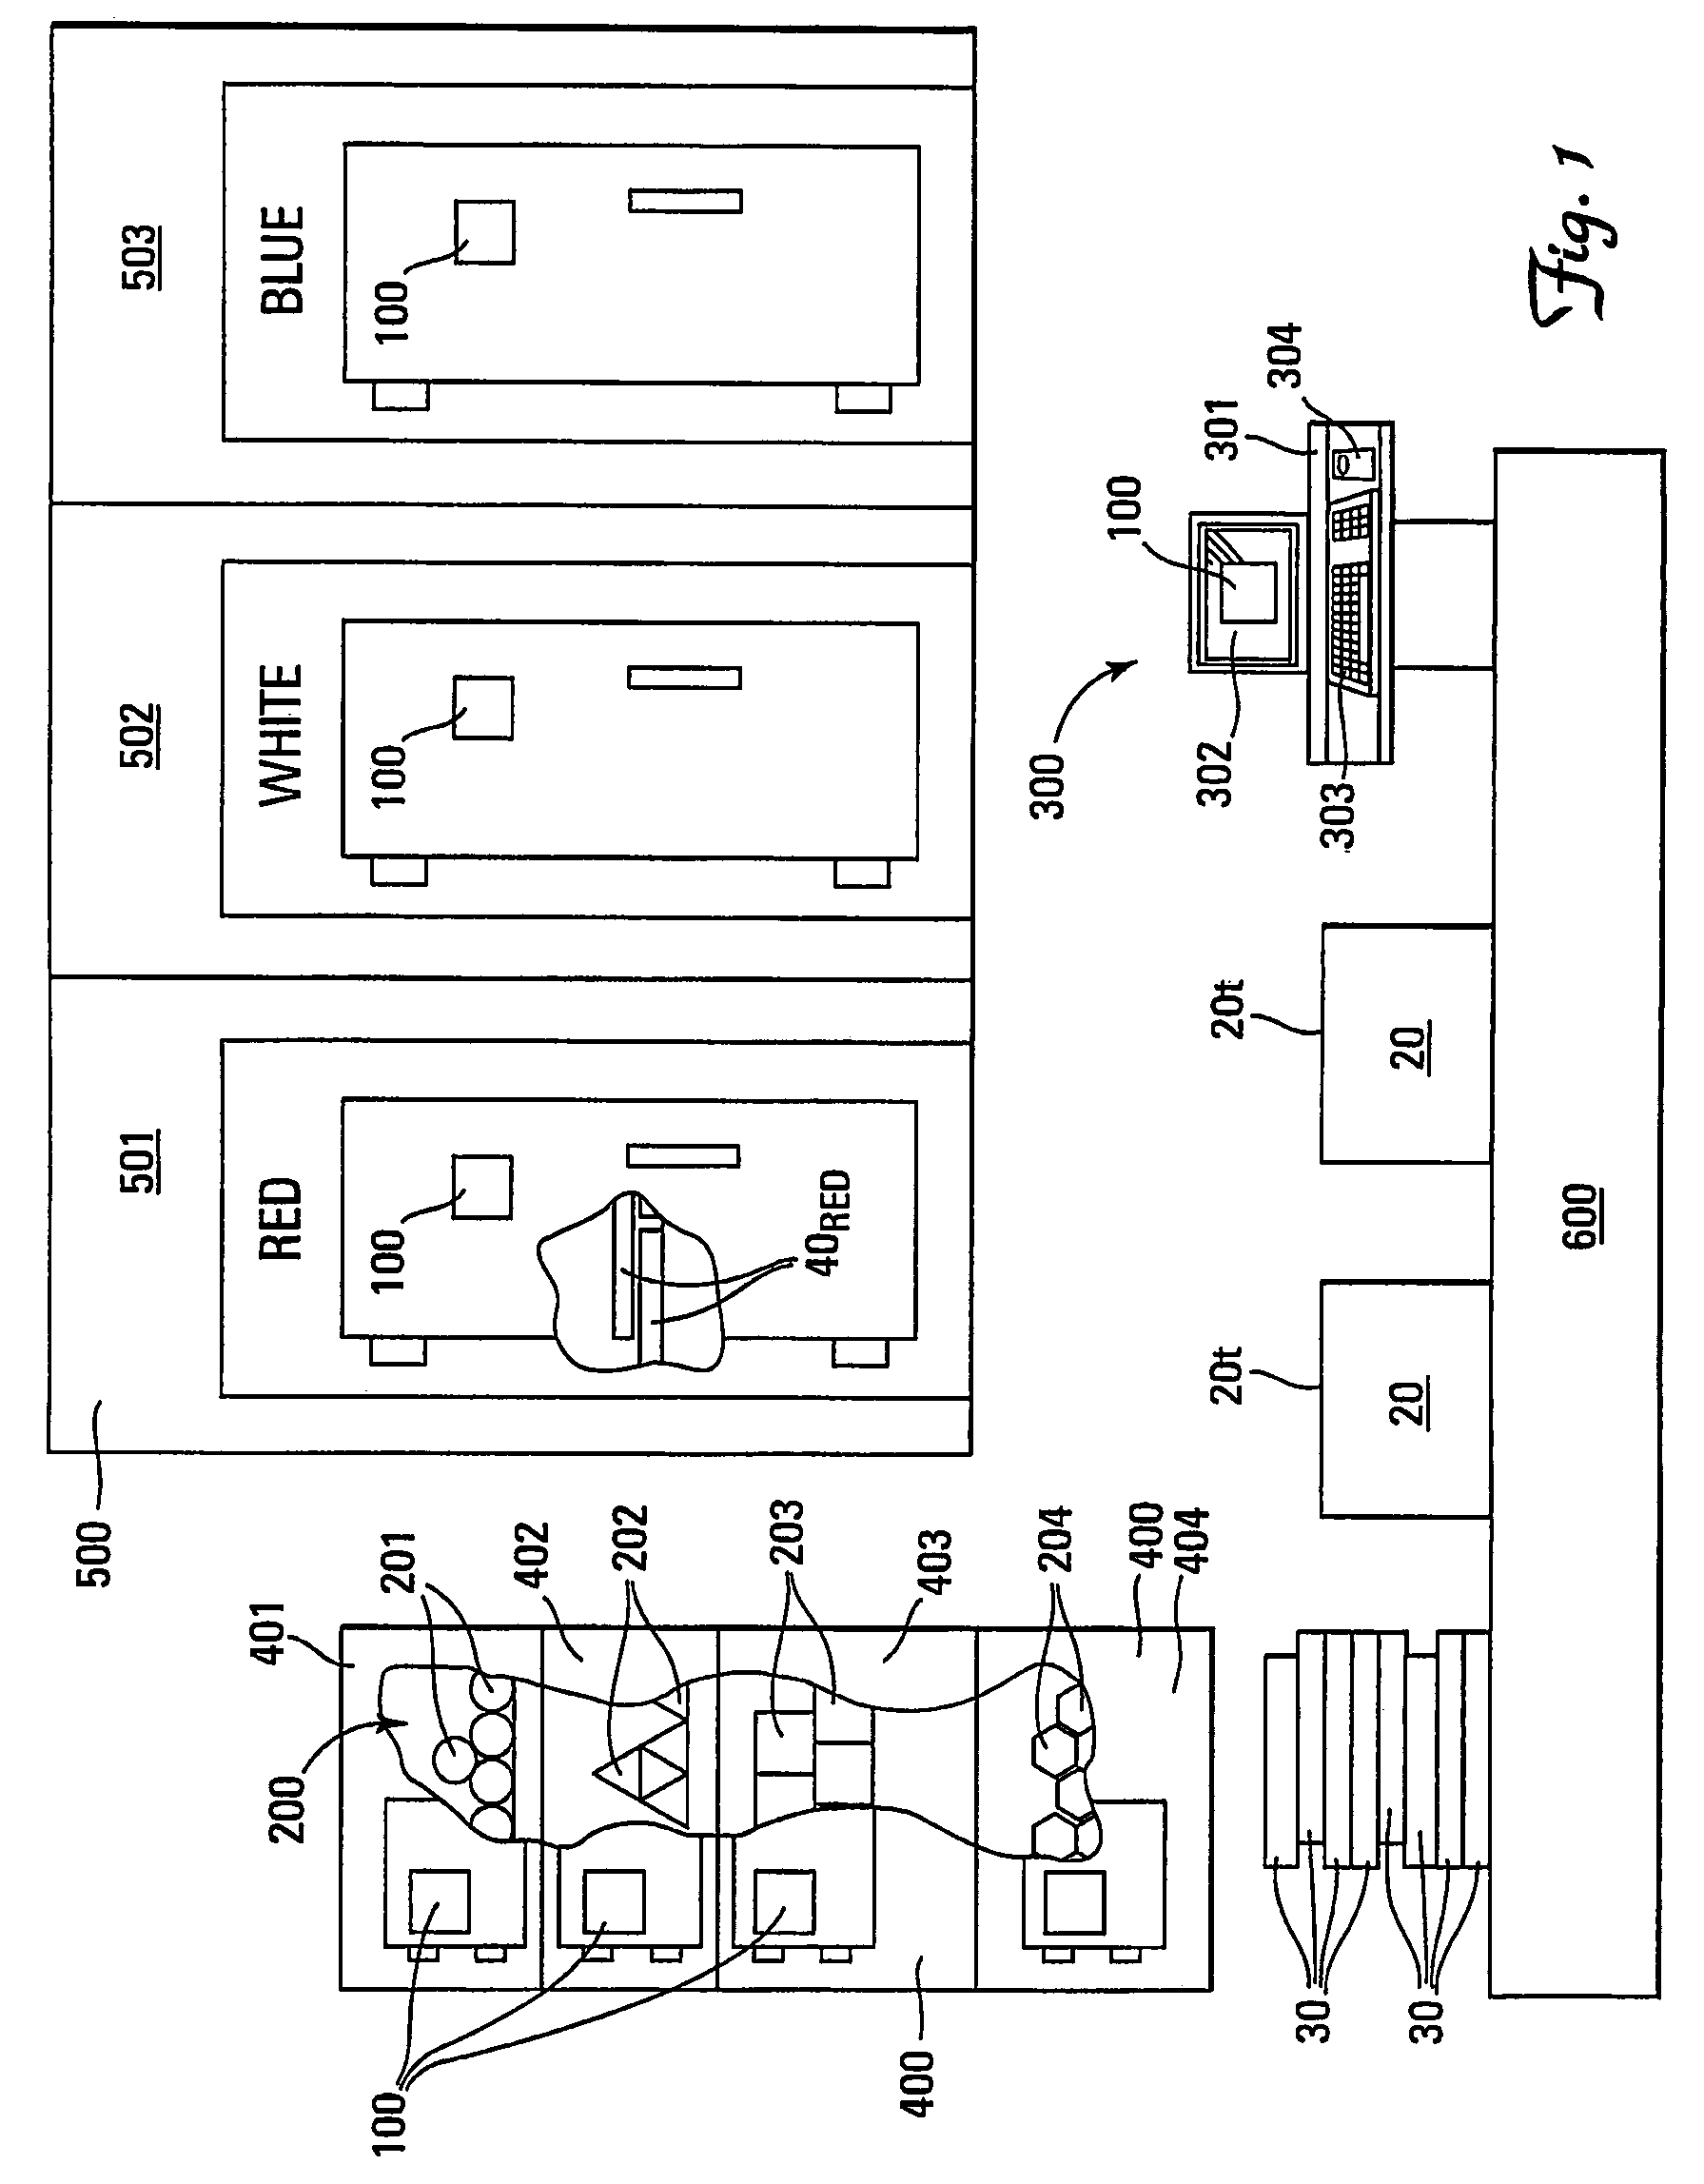 Method of packaging thermally labile goods employing color-coded panels of phase change material